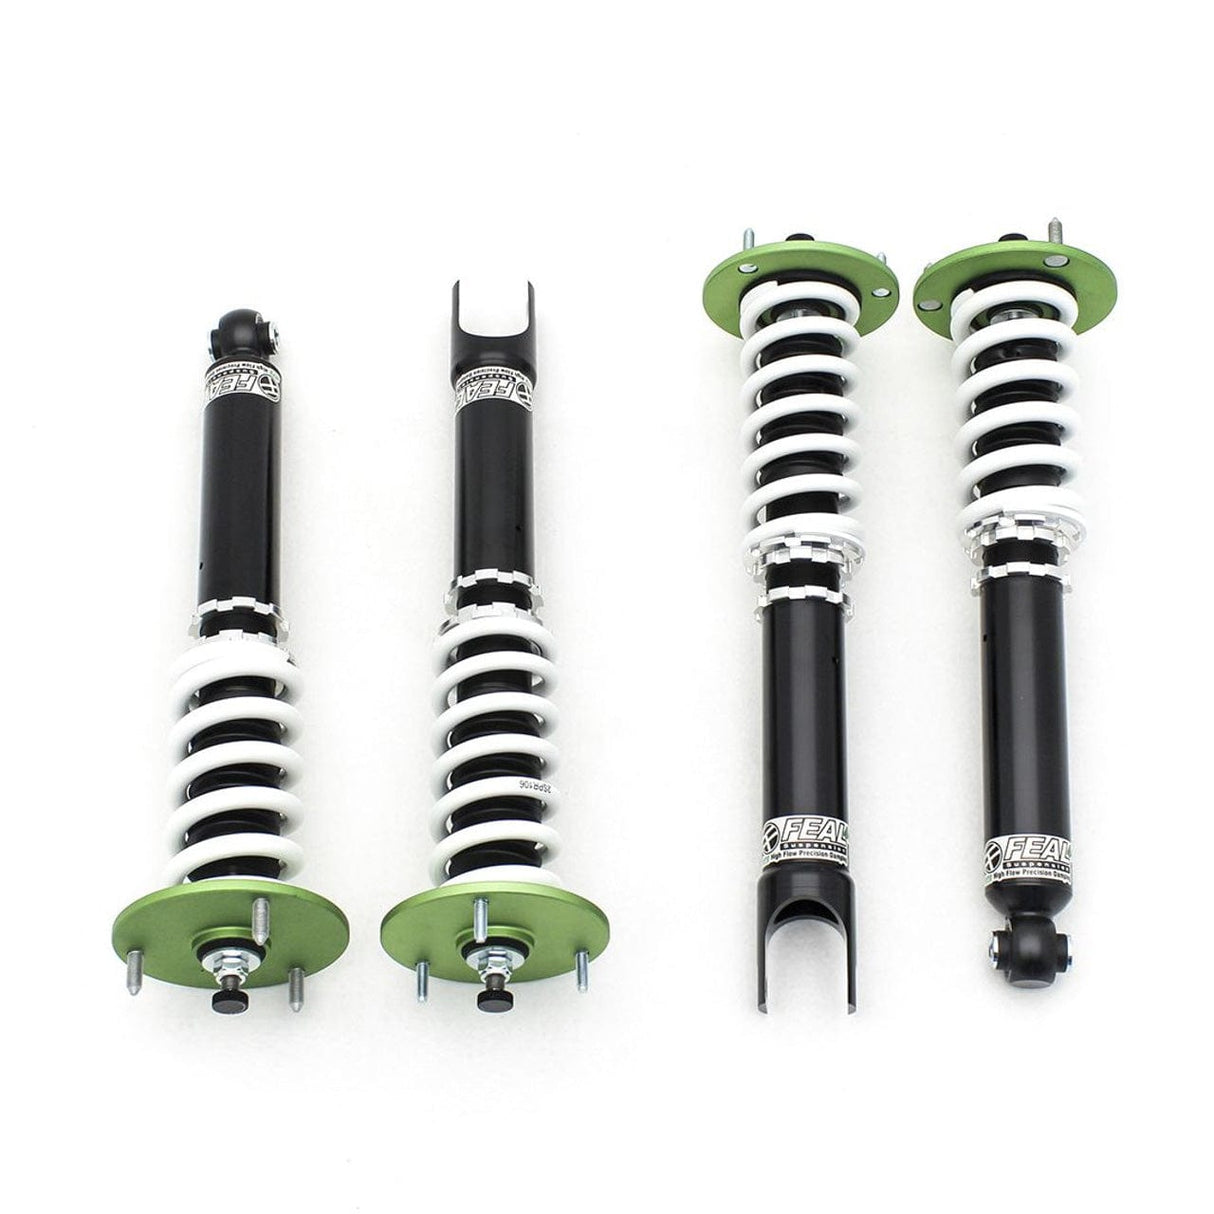 Feal 441 Coilovers - 2003-2007 Infiniti G35